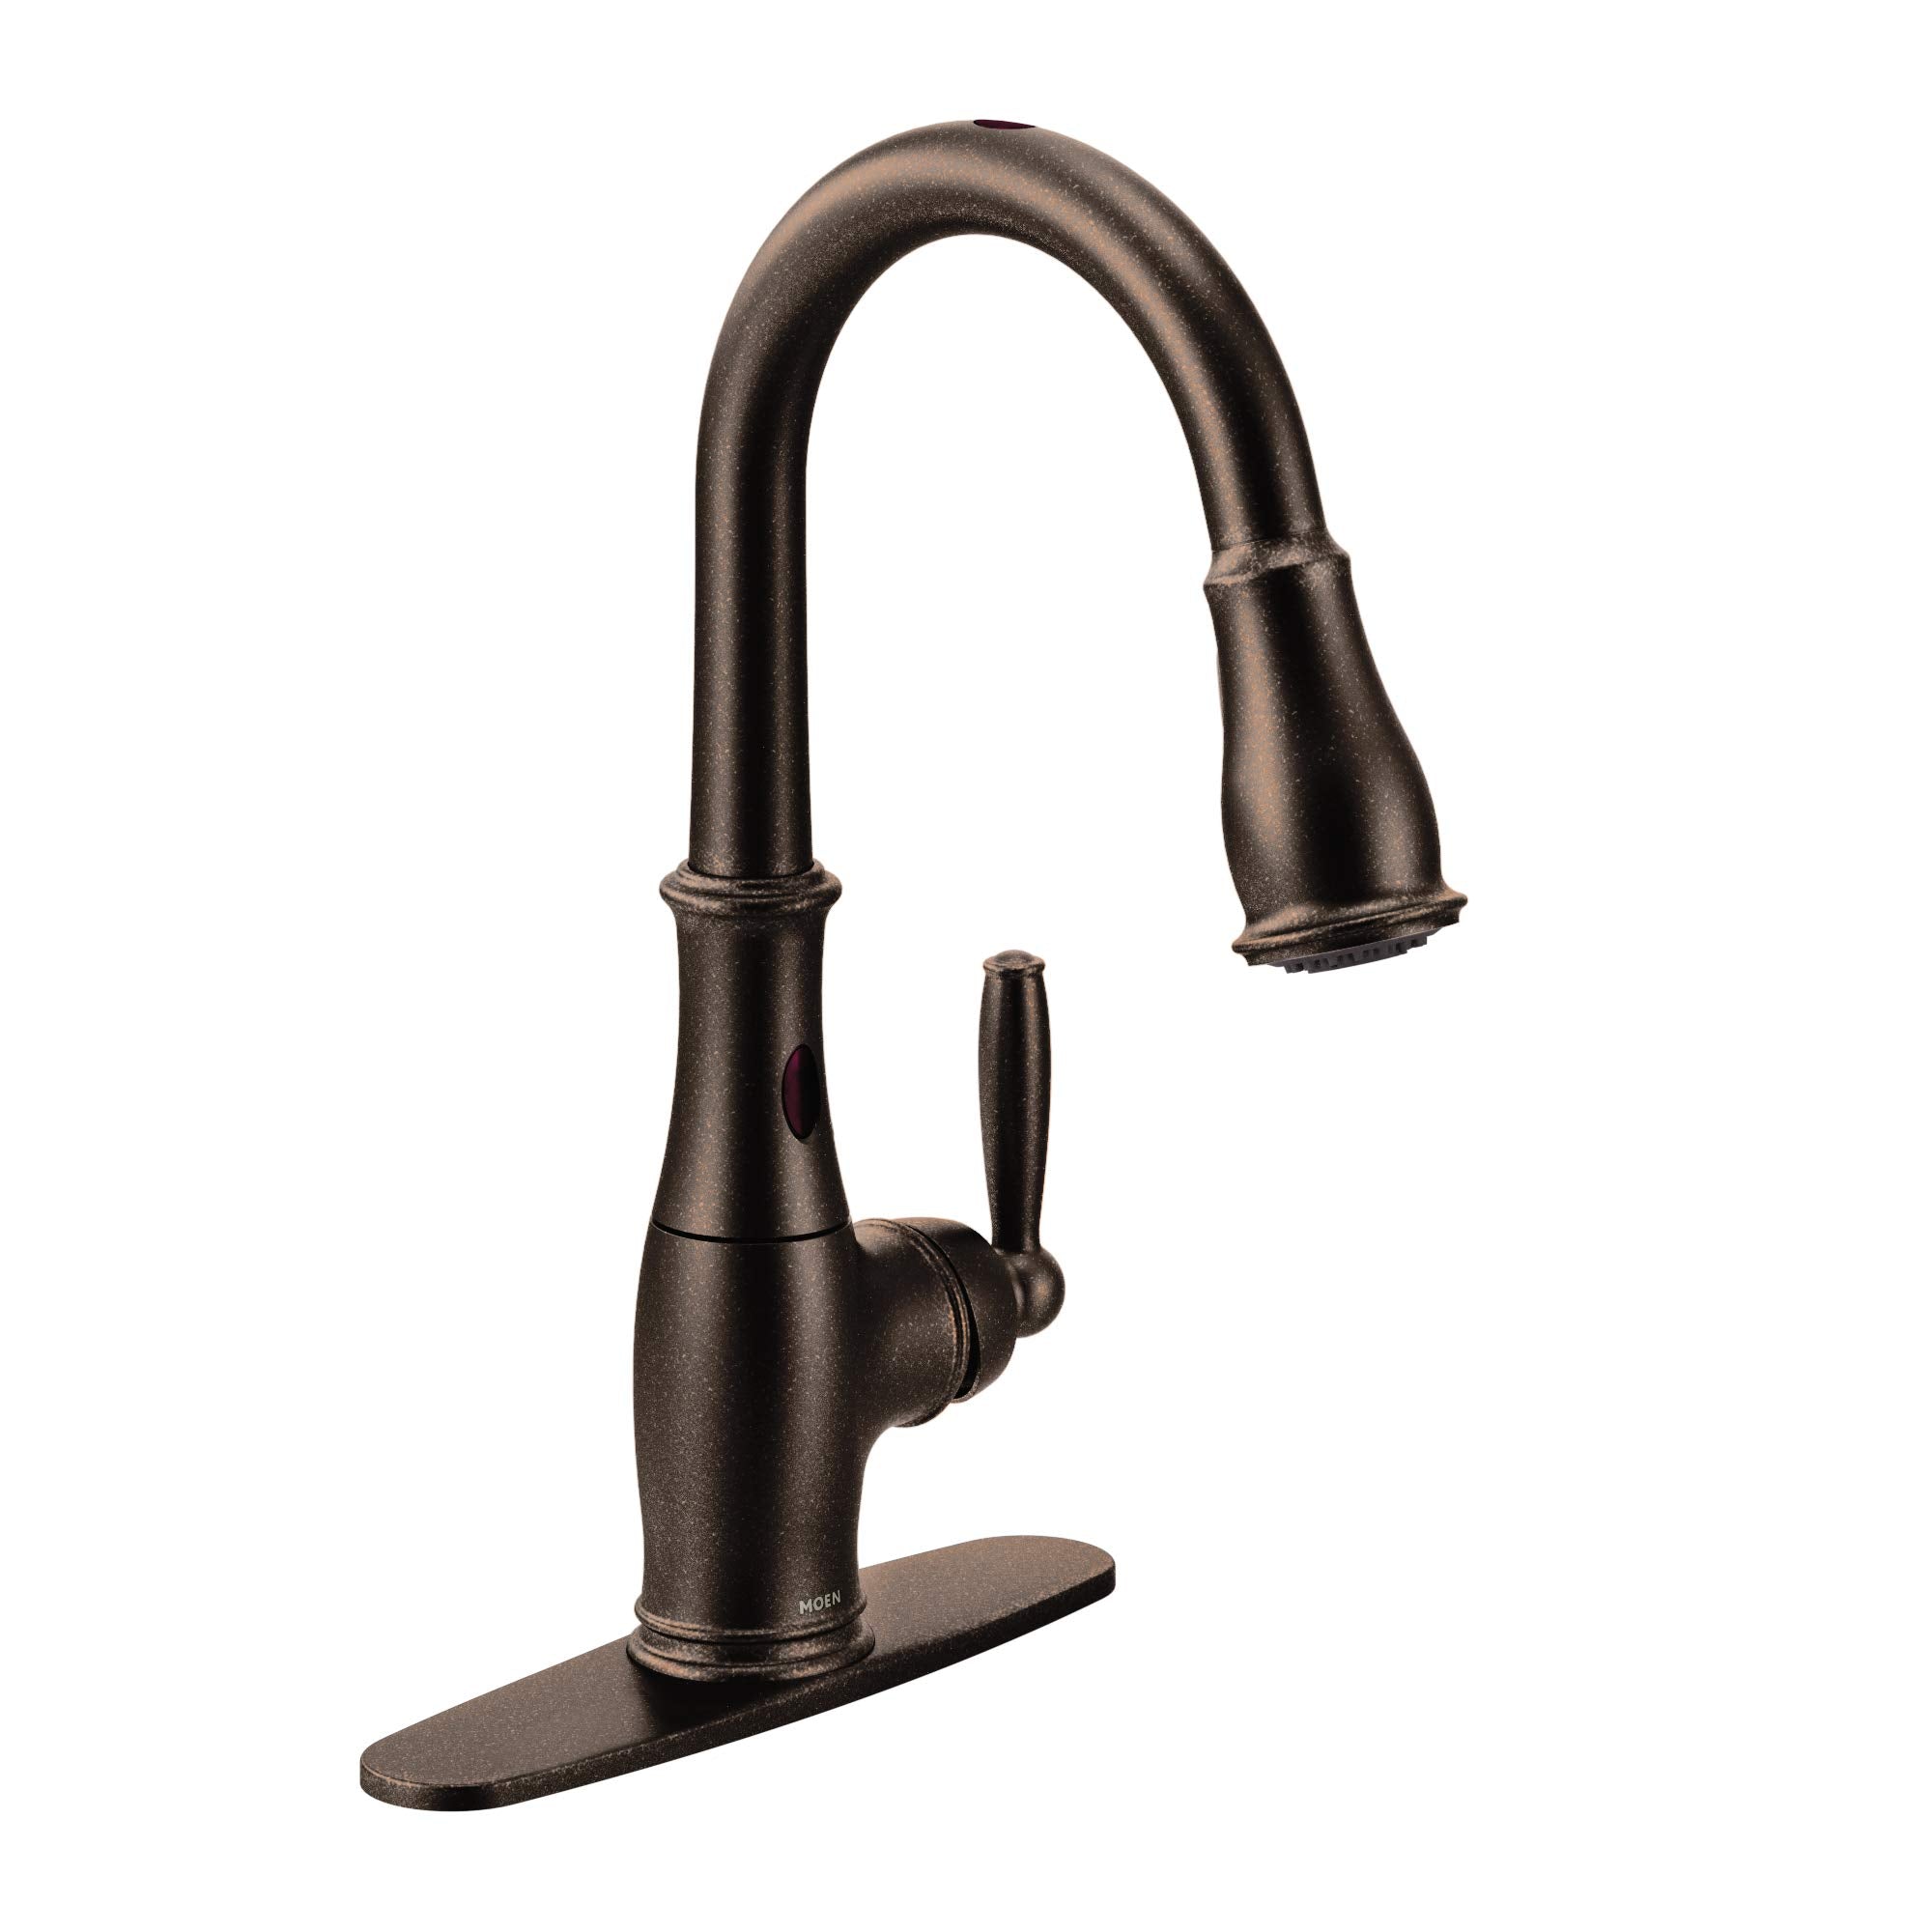 Moen Brantford Touchless One-Handle Pulldown Kitchen Faucet, Oil-Rubbed Bronze (7625914286318)